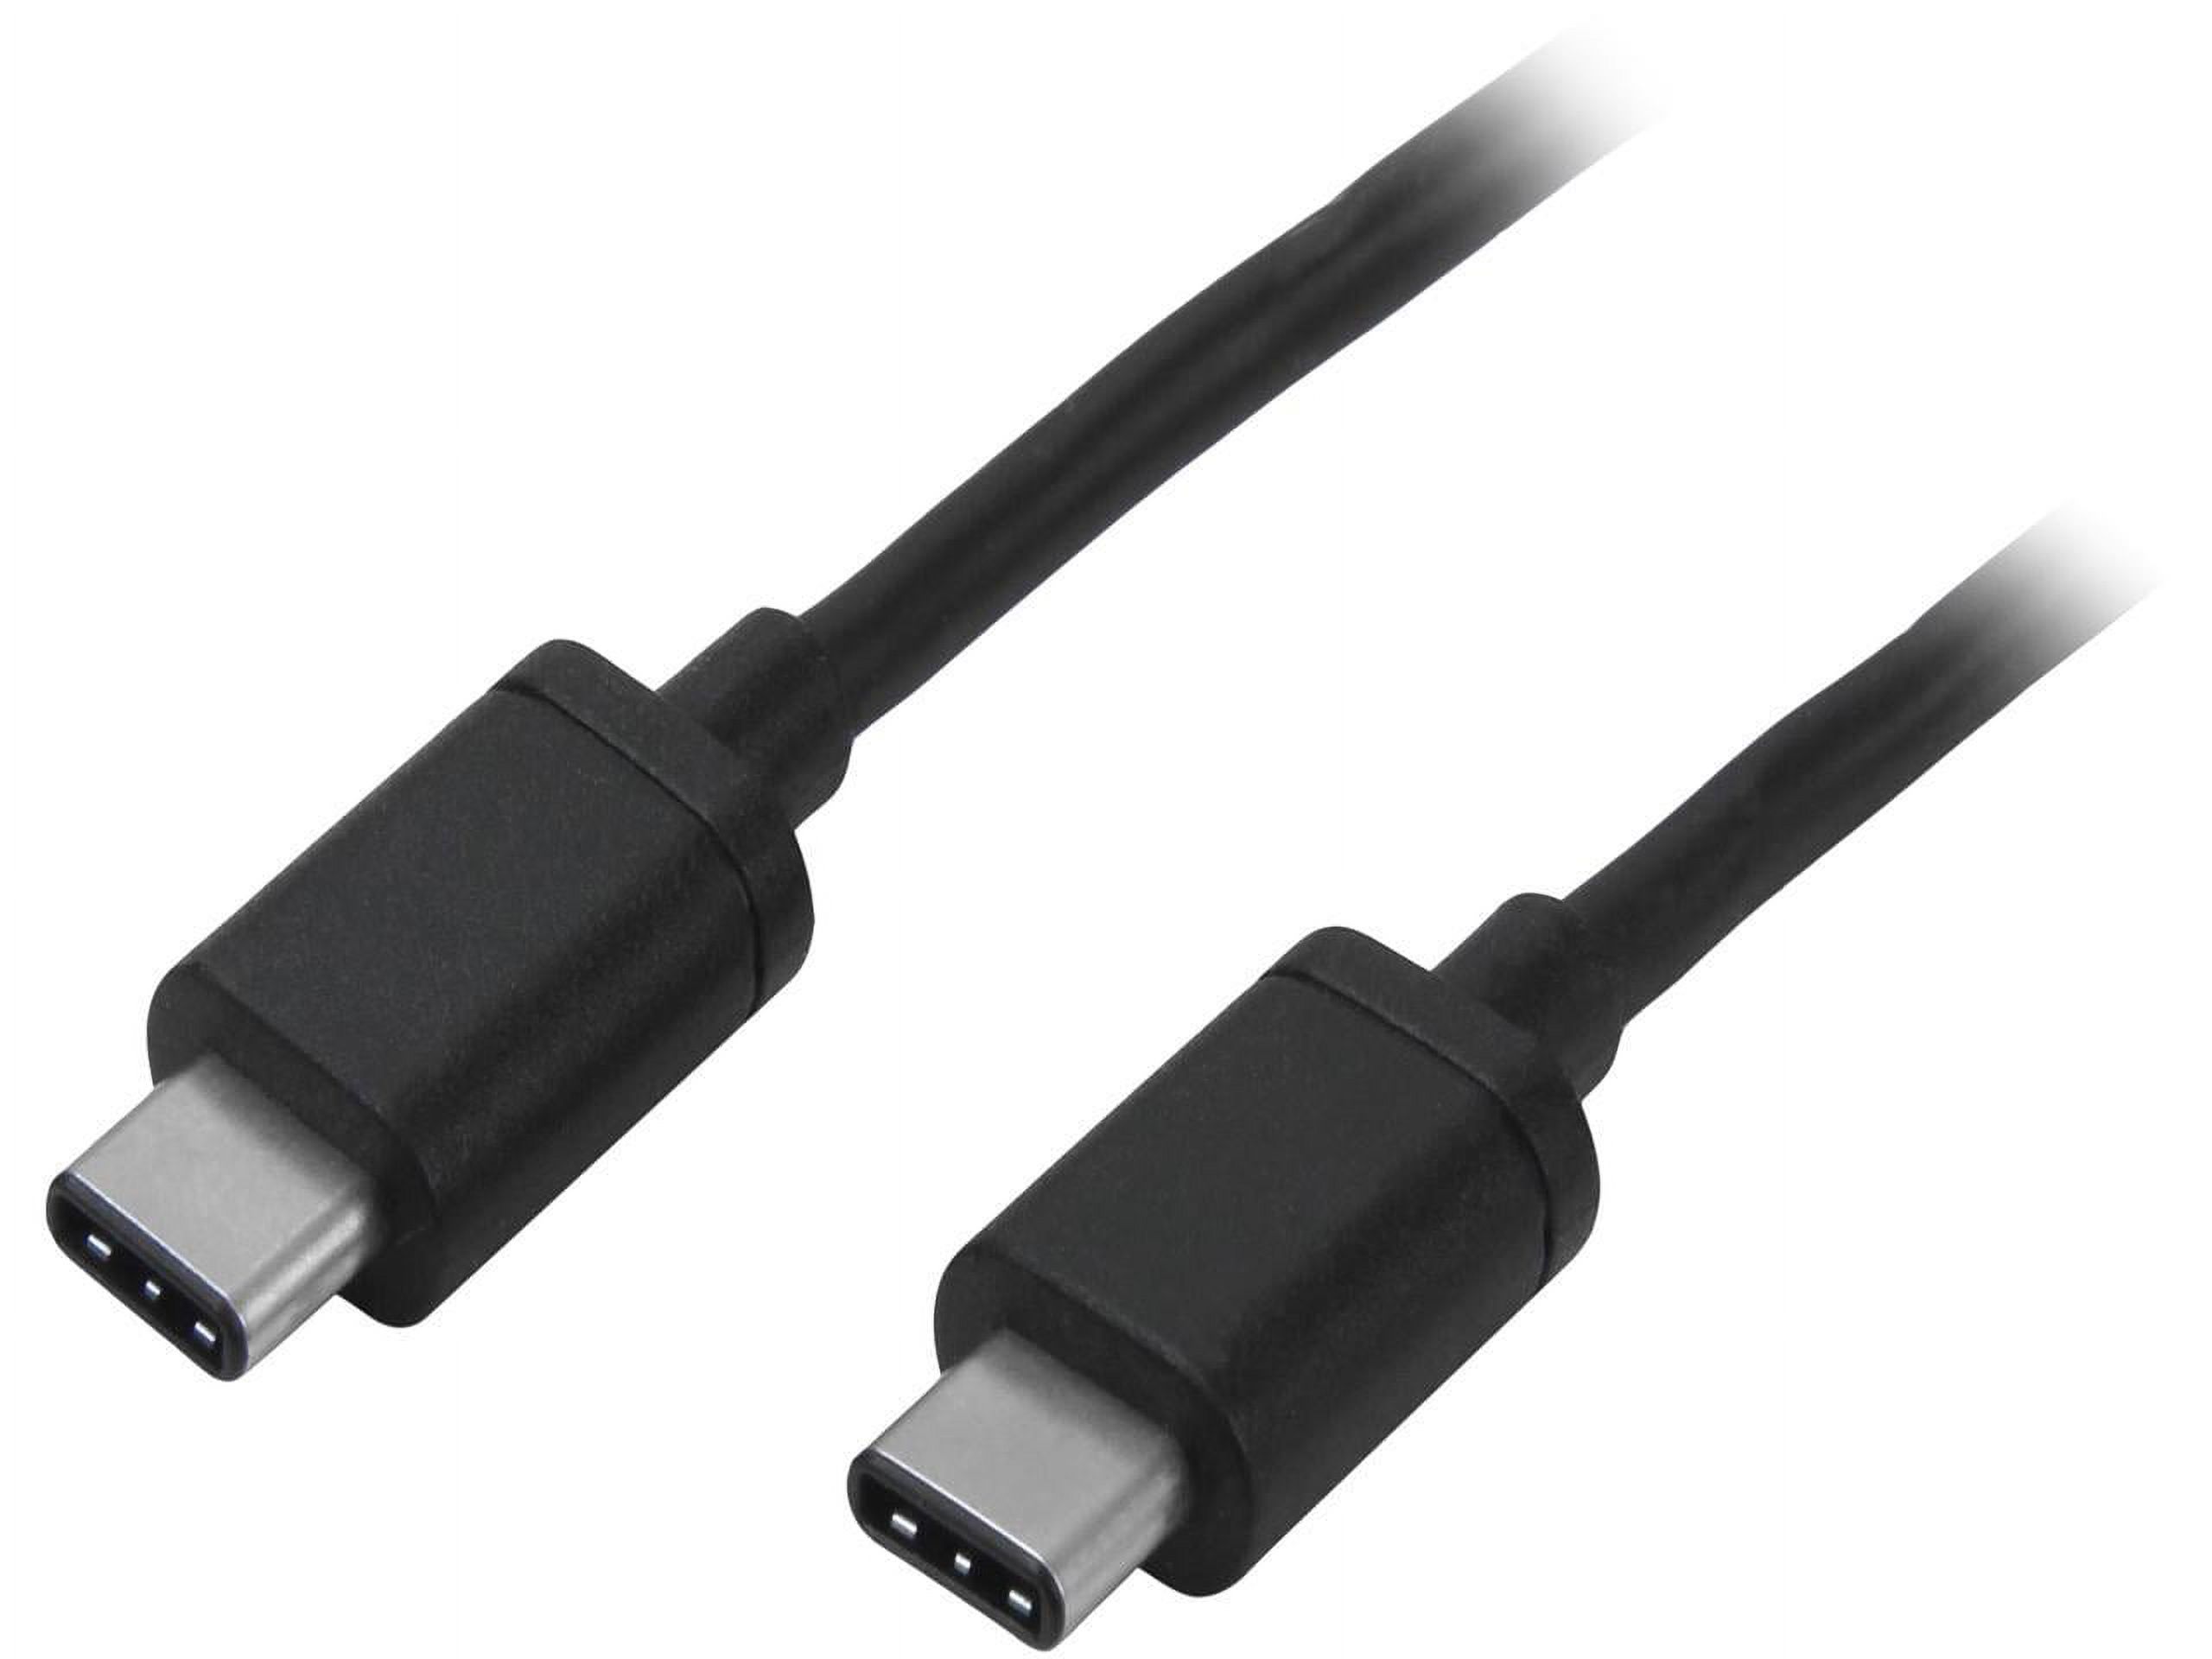 StarTech.com USB2CC2M 2m 6 ft USB C Cable - M/M - USB 2.0 - USB-IF Certified - USB-C Charging Cable - USB 2.0 Type C Cable - image 1 of 3